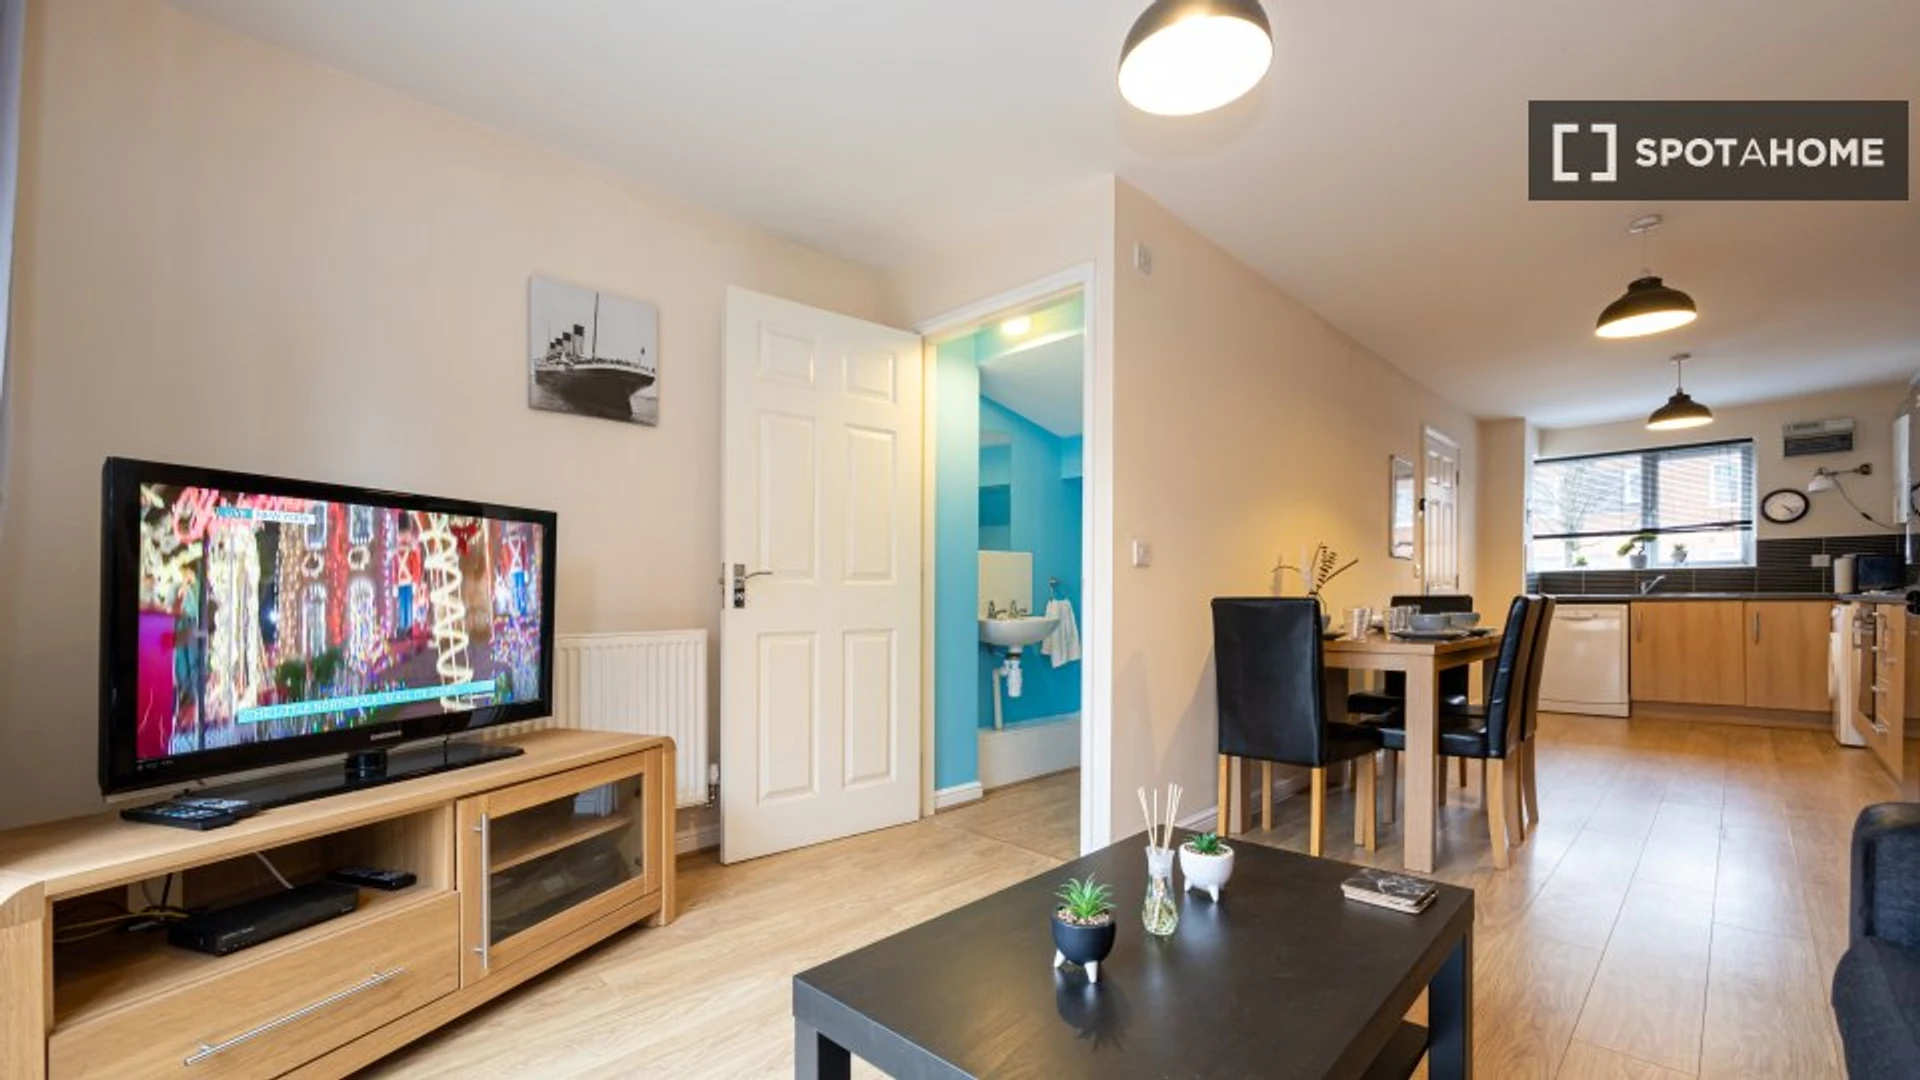 Accommodation in the centre of Manchester